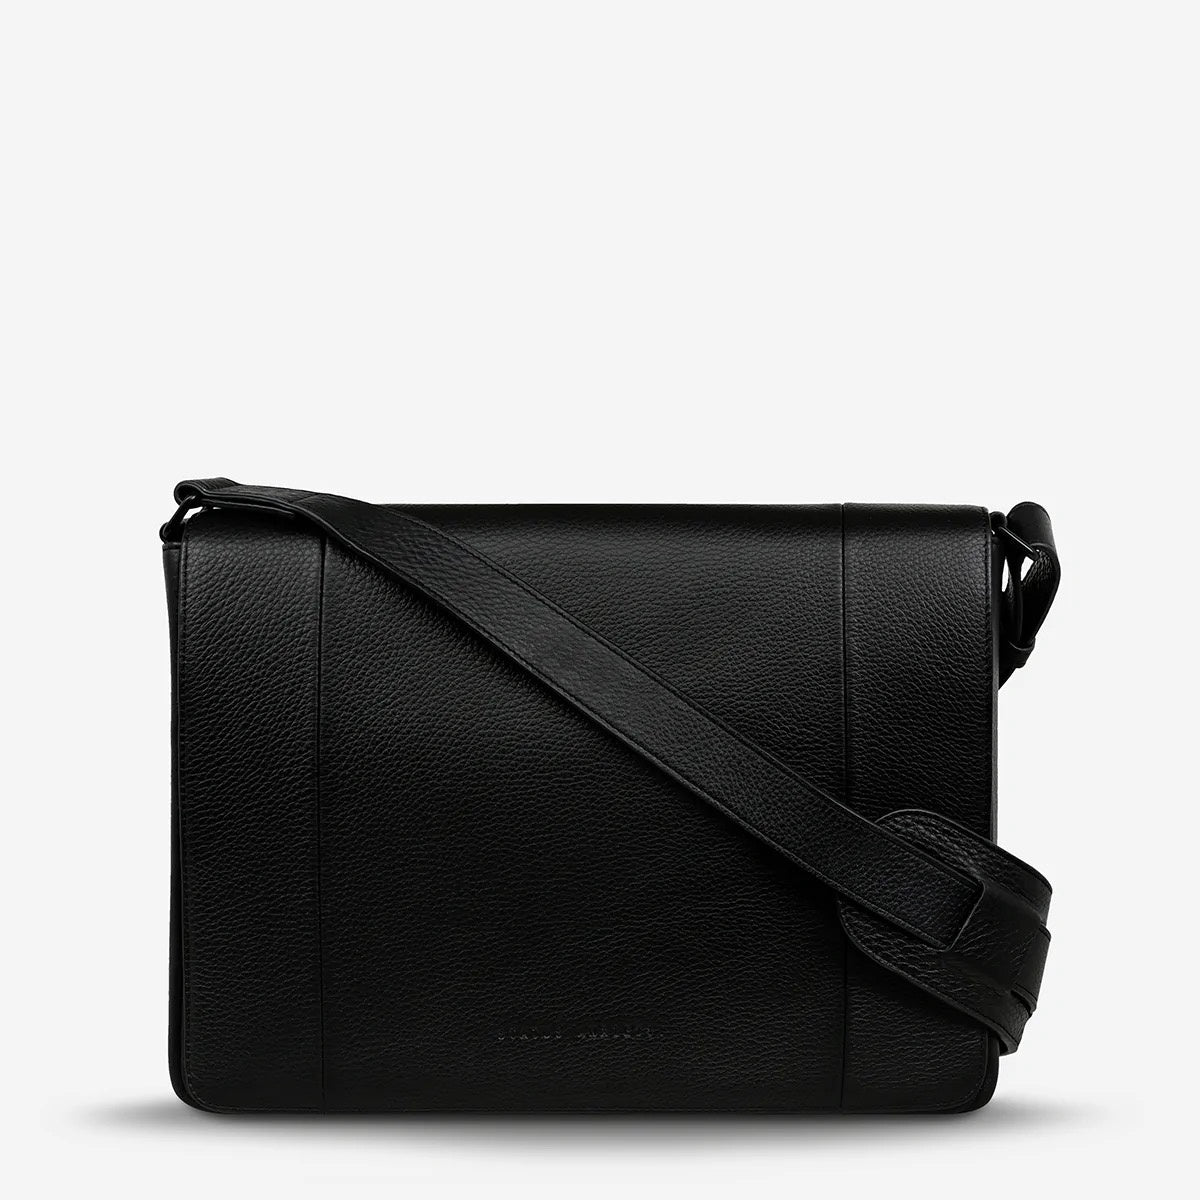 Status Anxiety - Set Your Sights Bag - Black